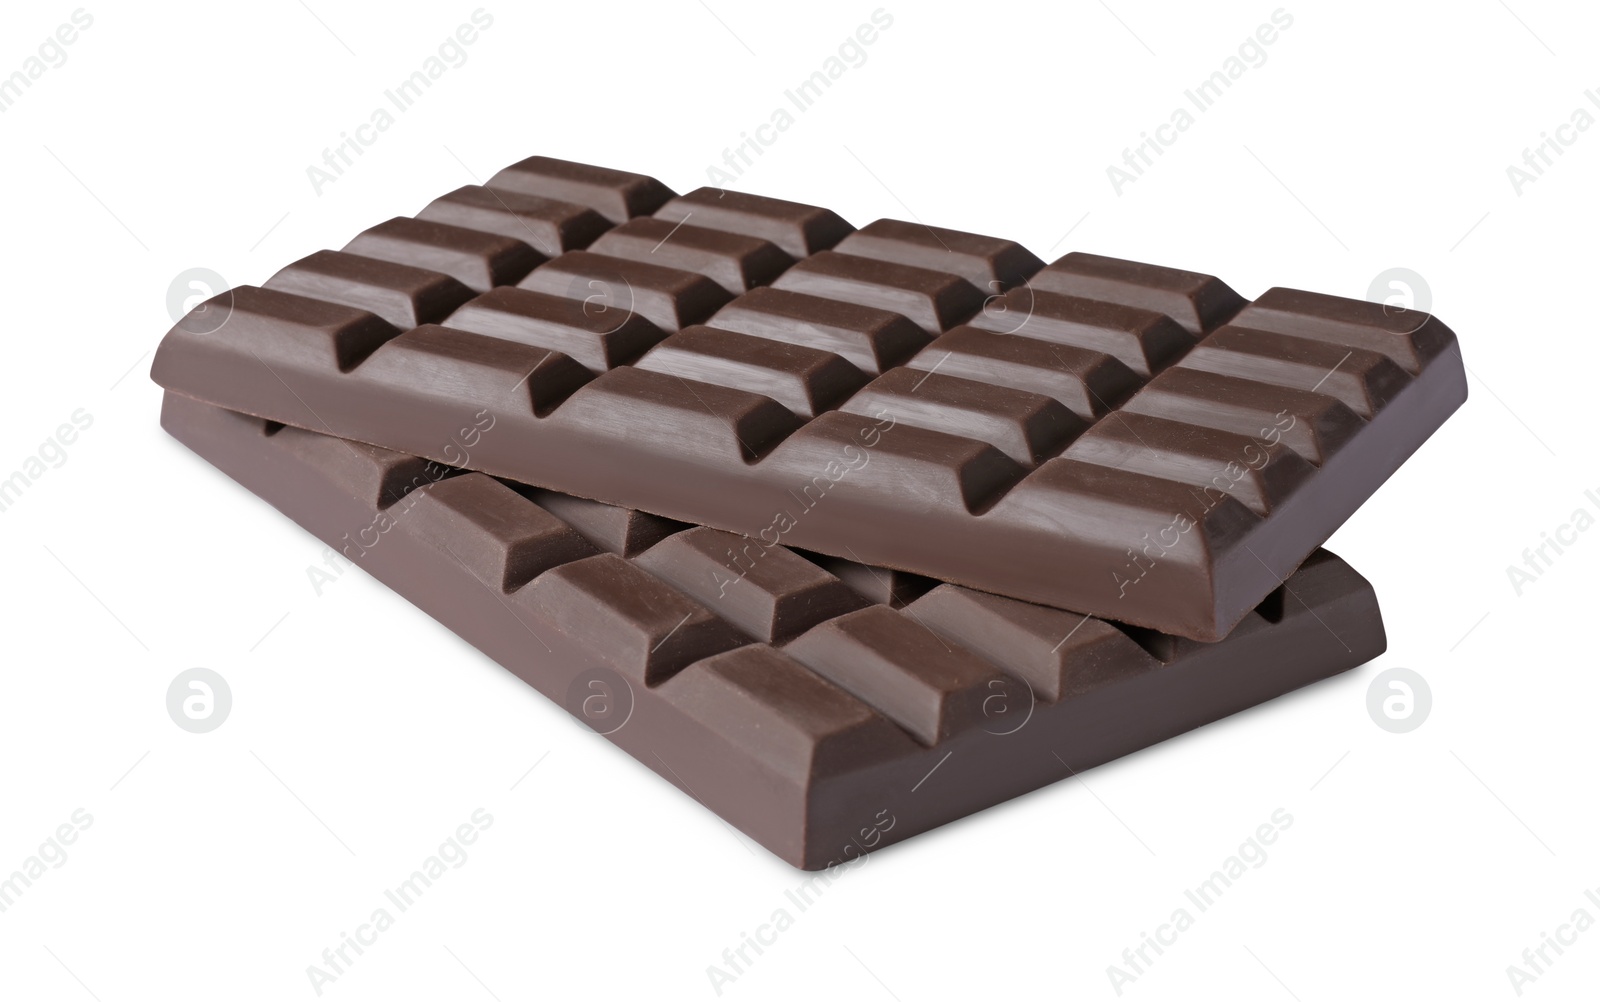 Photo of Delicious dark chocolate bars isolated on white